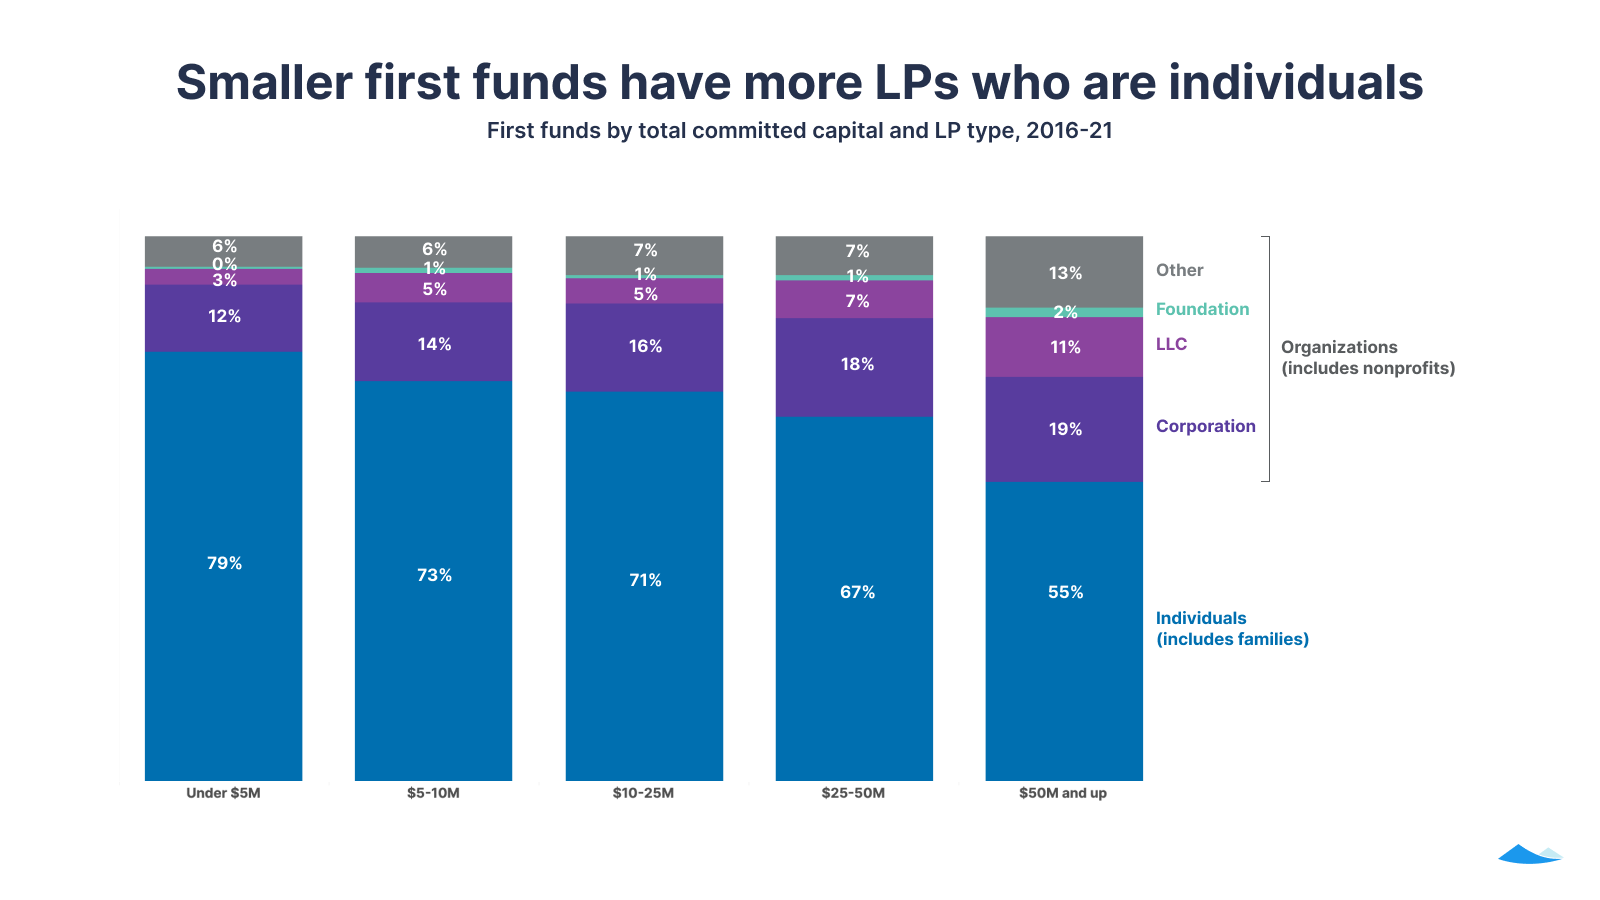 Smaller first funds have more LPs who are individuals: First funds by total committed capital and LP type, 2016-21